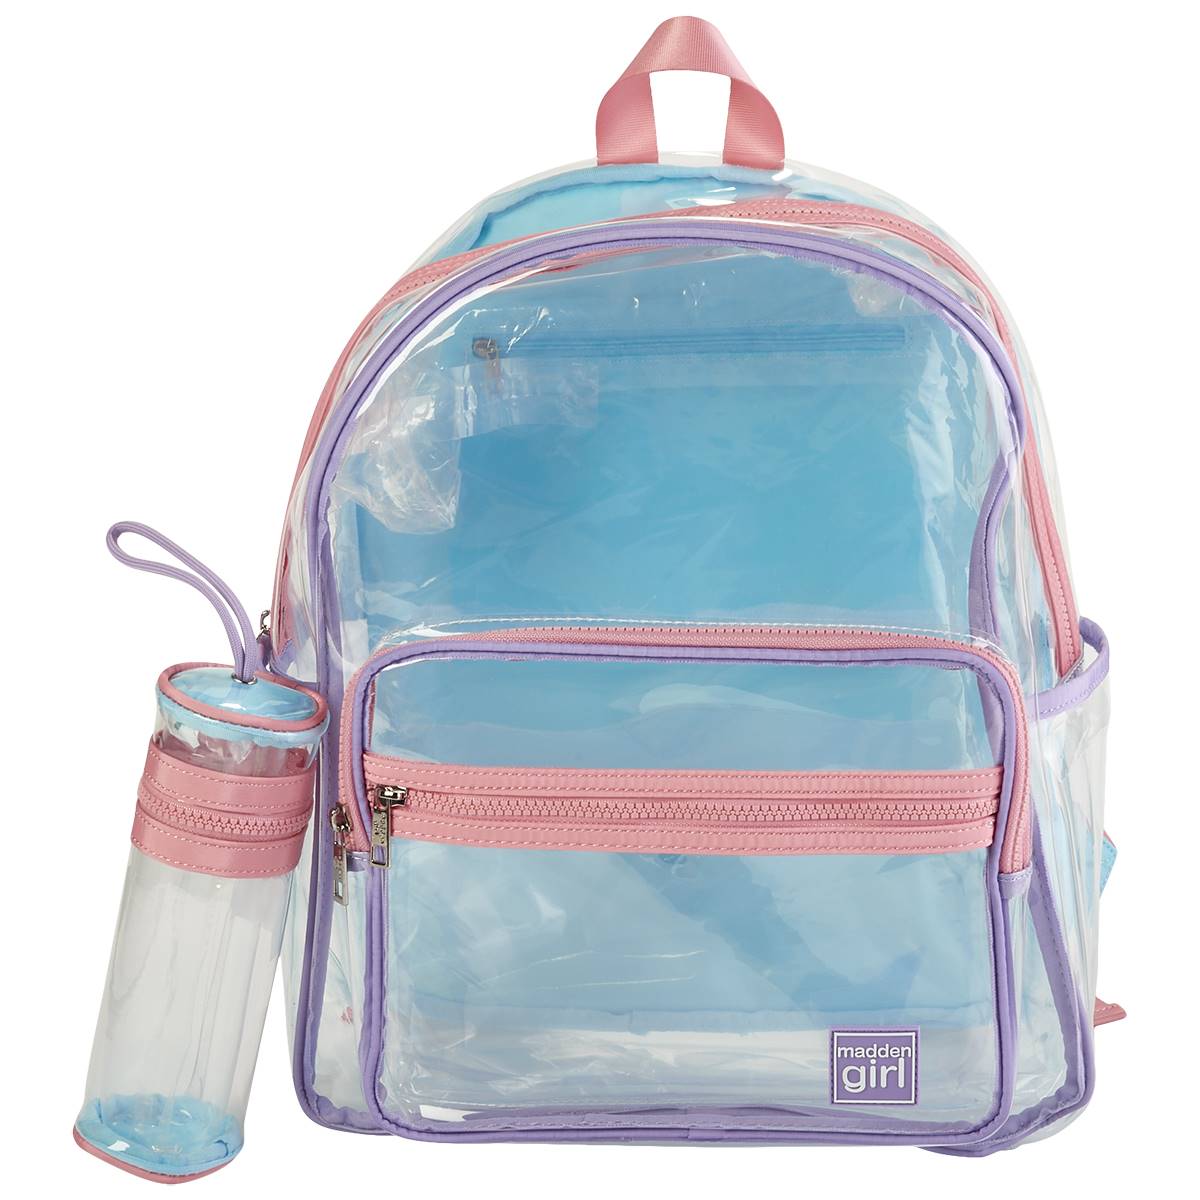 Madden Girl Clear Vinyl Backpack W/ Pencil Case